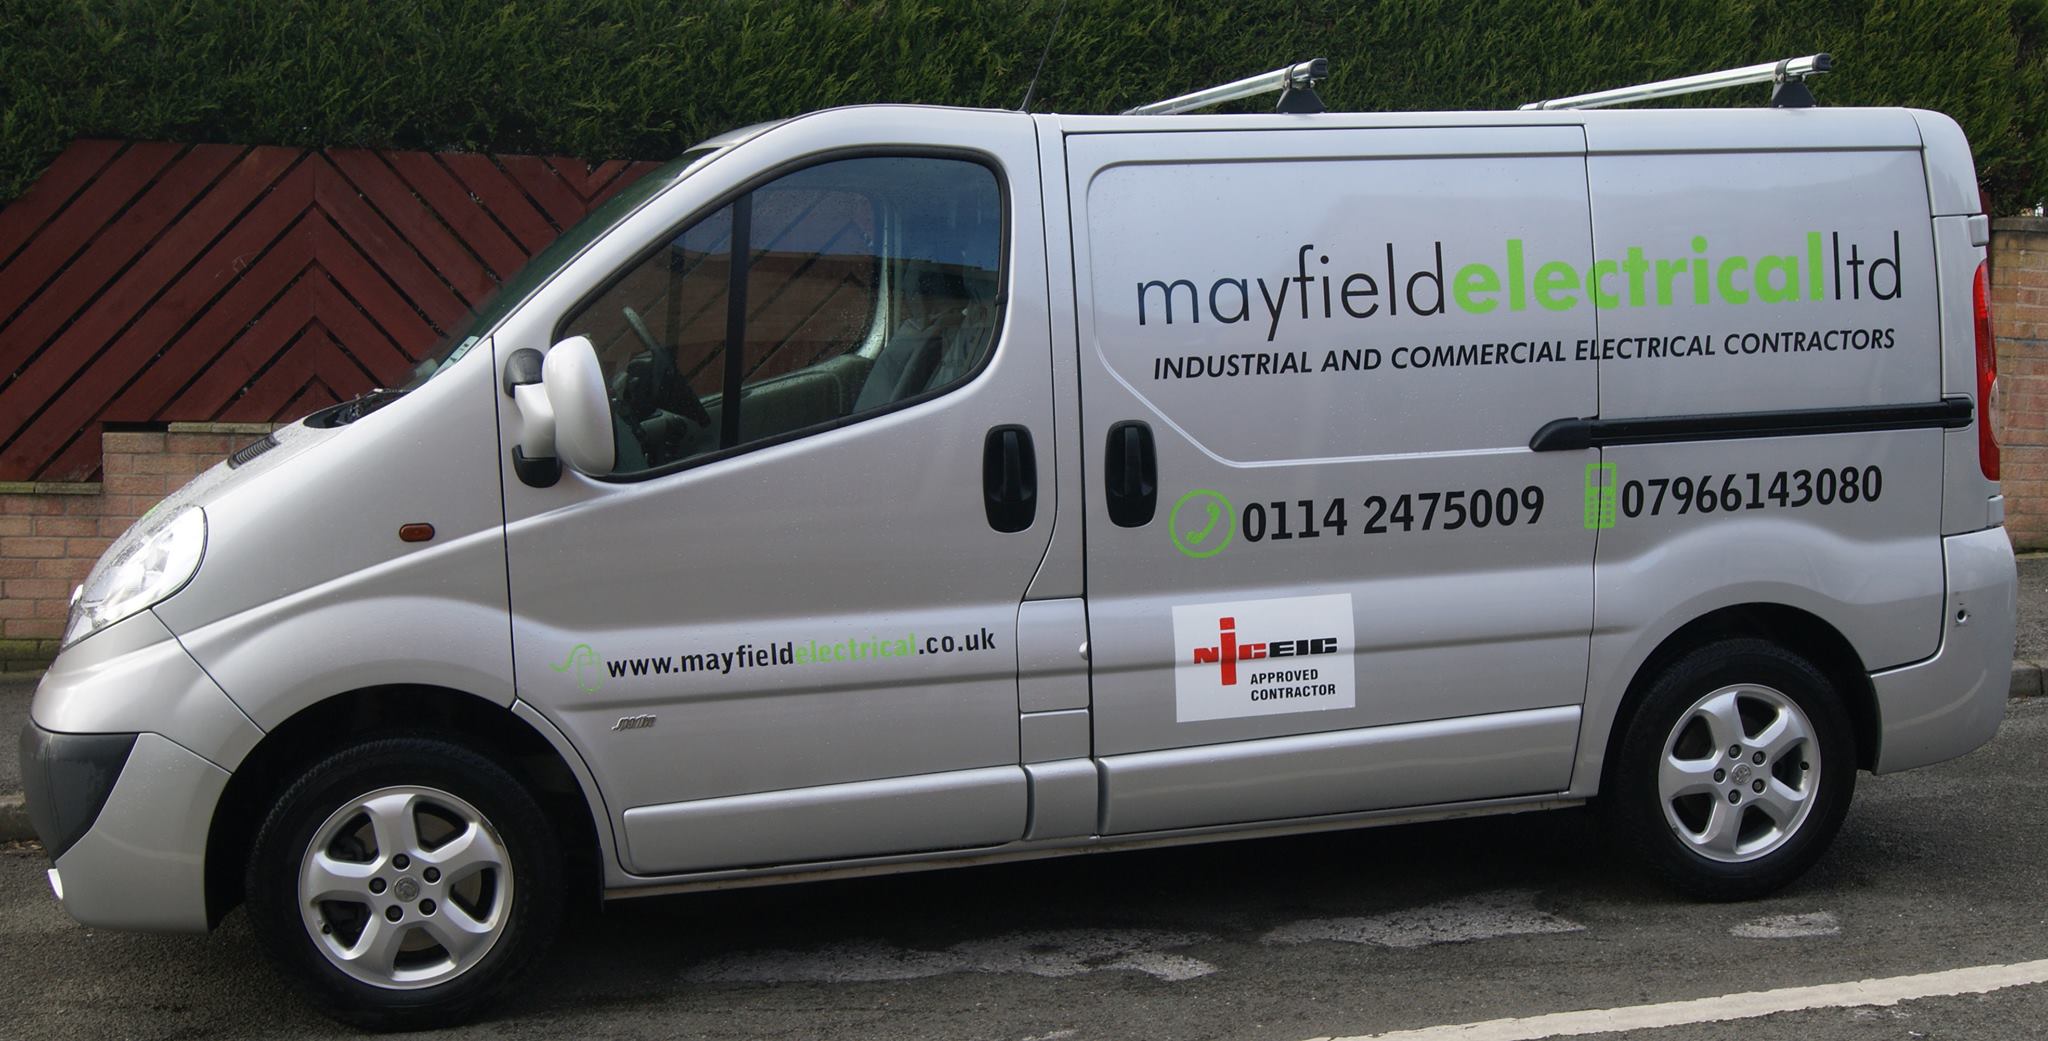 Contact Mayfield Electrical